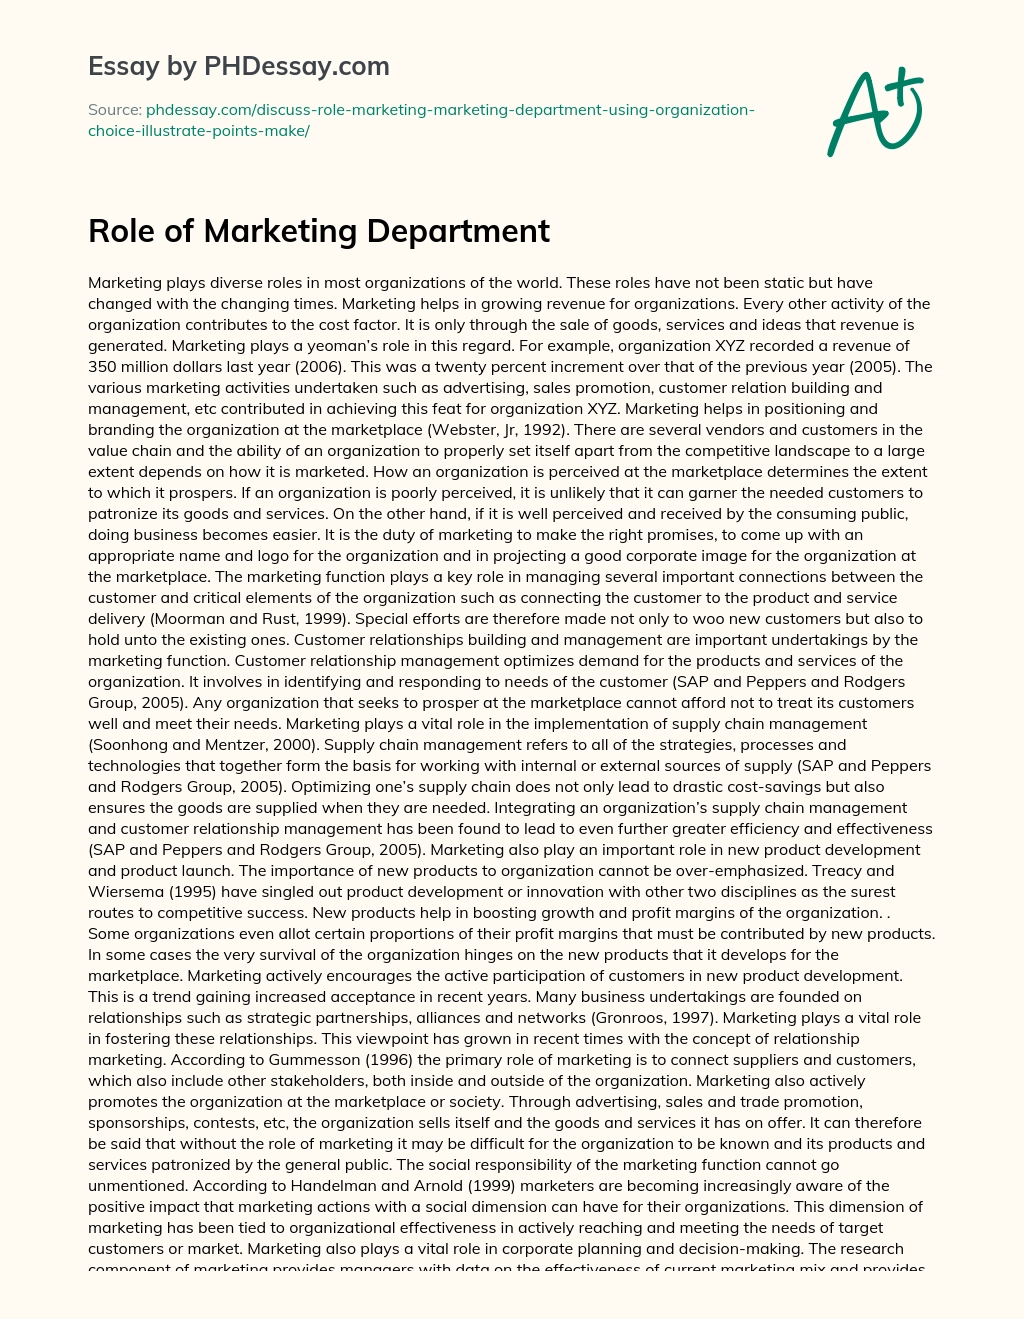 Role of Marketing Department essay